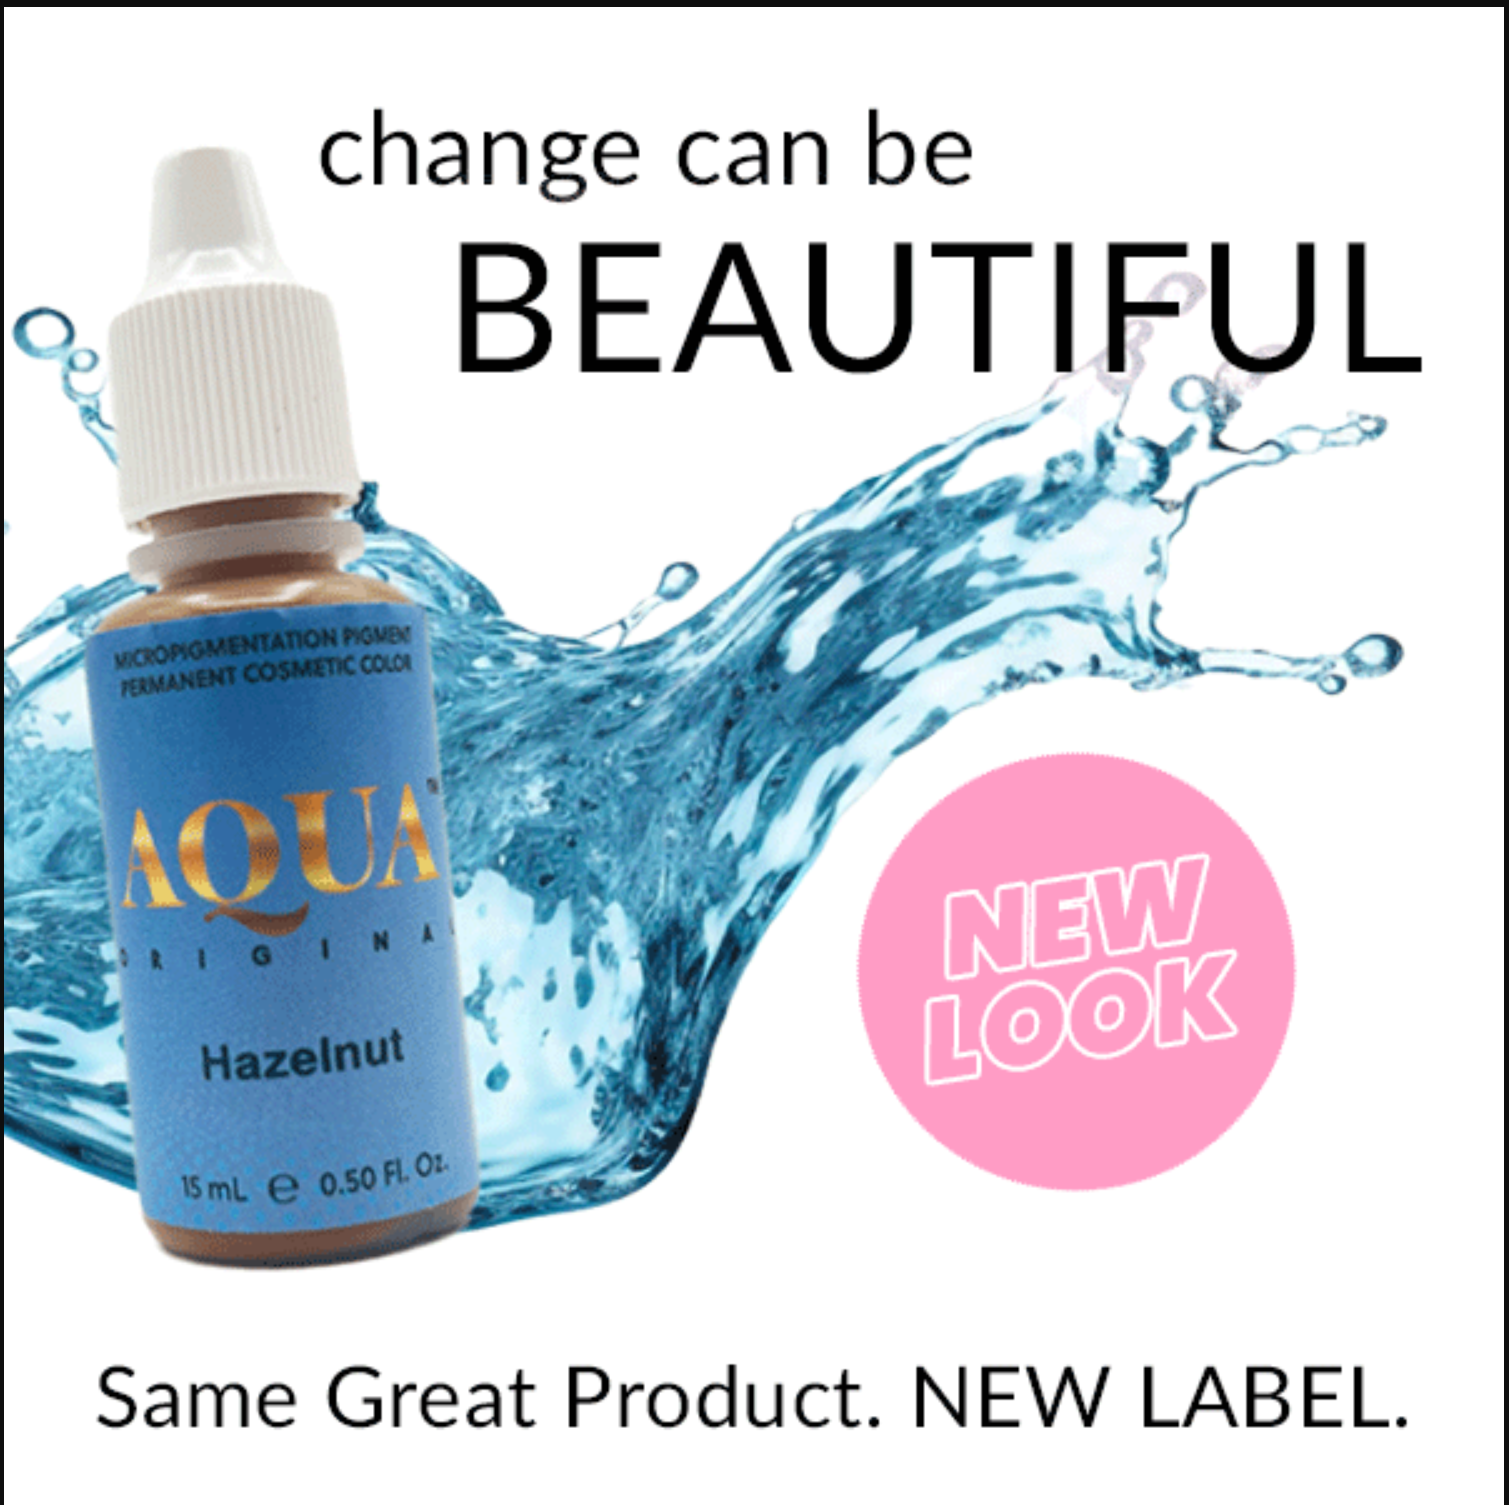 Meet the New Labels: "GLOBAL" and "ORIGINAL"